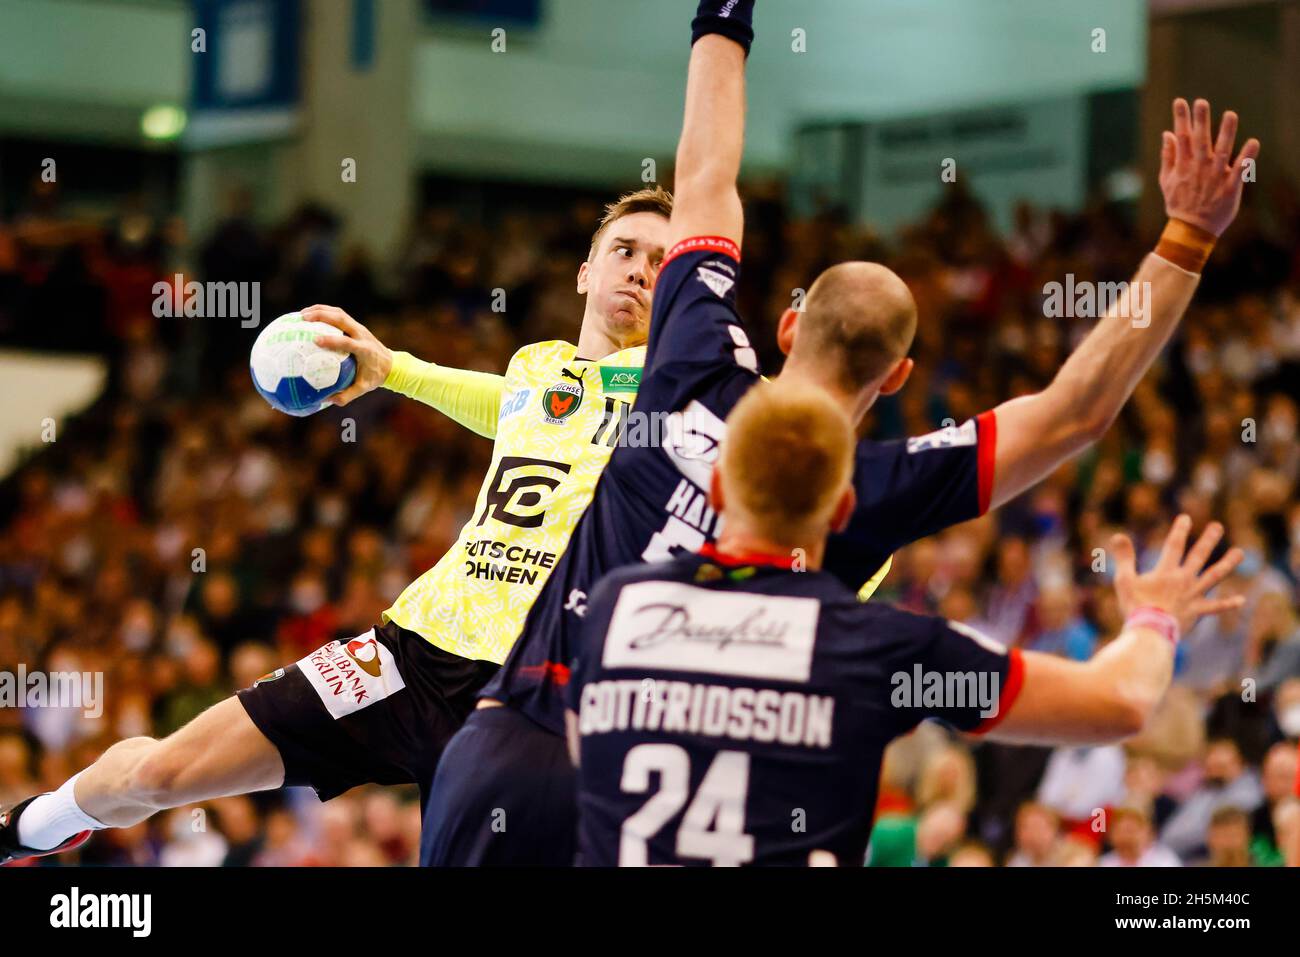 Simon Andersson High Resolution Stock Photography and Images - Alamy